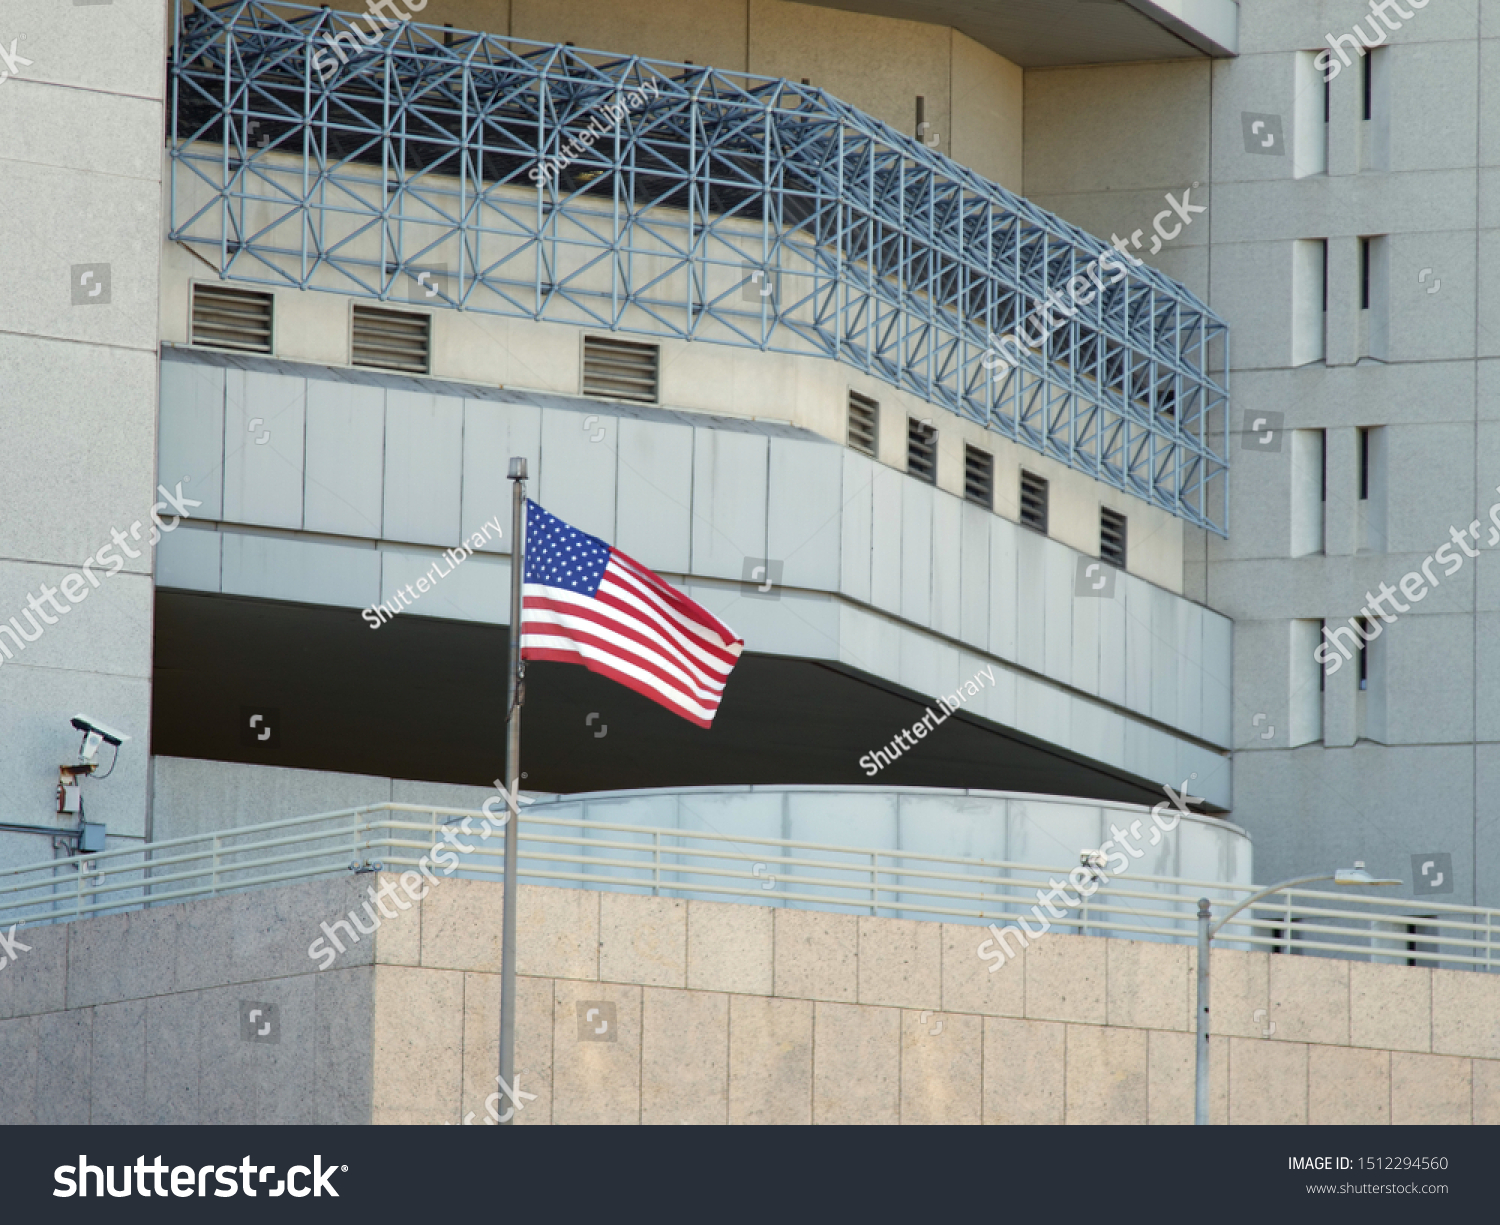 Prison Correctional Facility Close Up with American Flag #1512294560